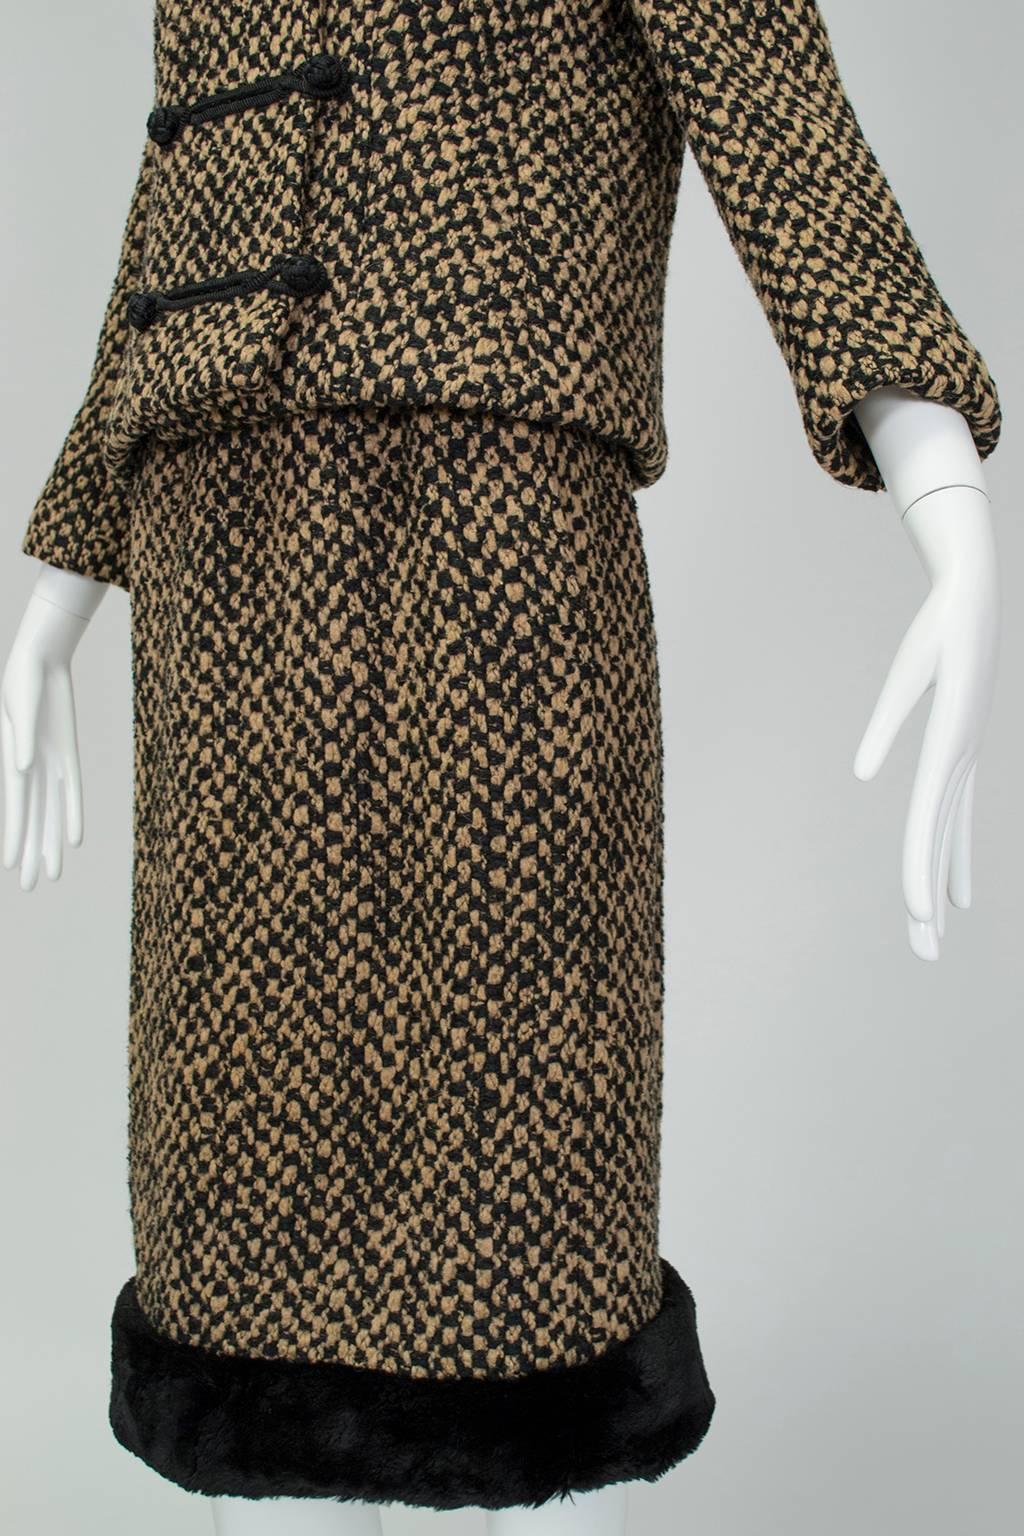 Black Brown Tweed Sheared Mink Trim Camelot Skirt Suit with Standing Collar- S, 1960s For Sale